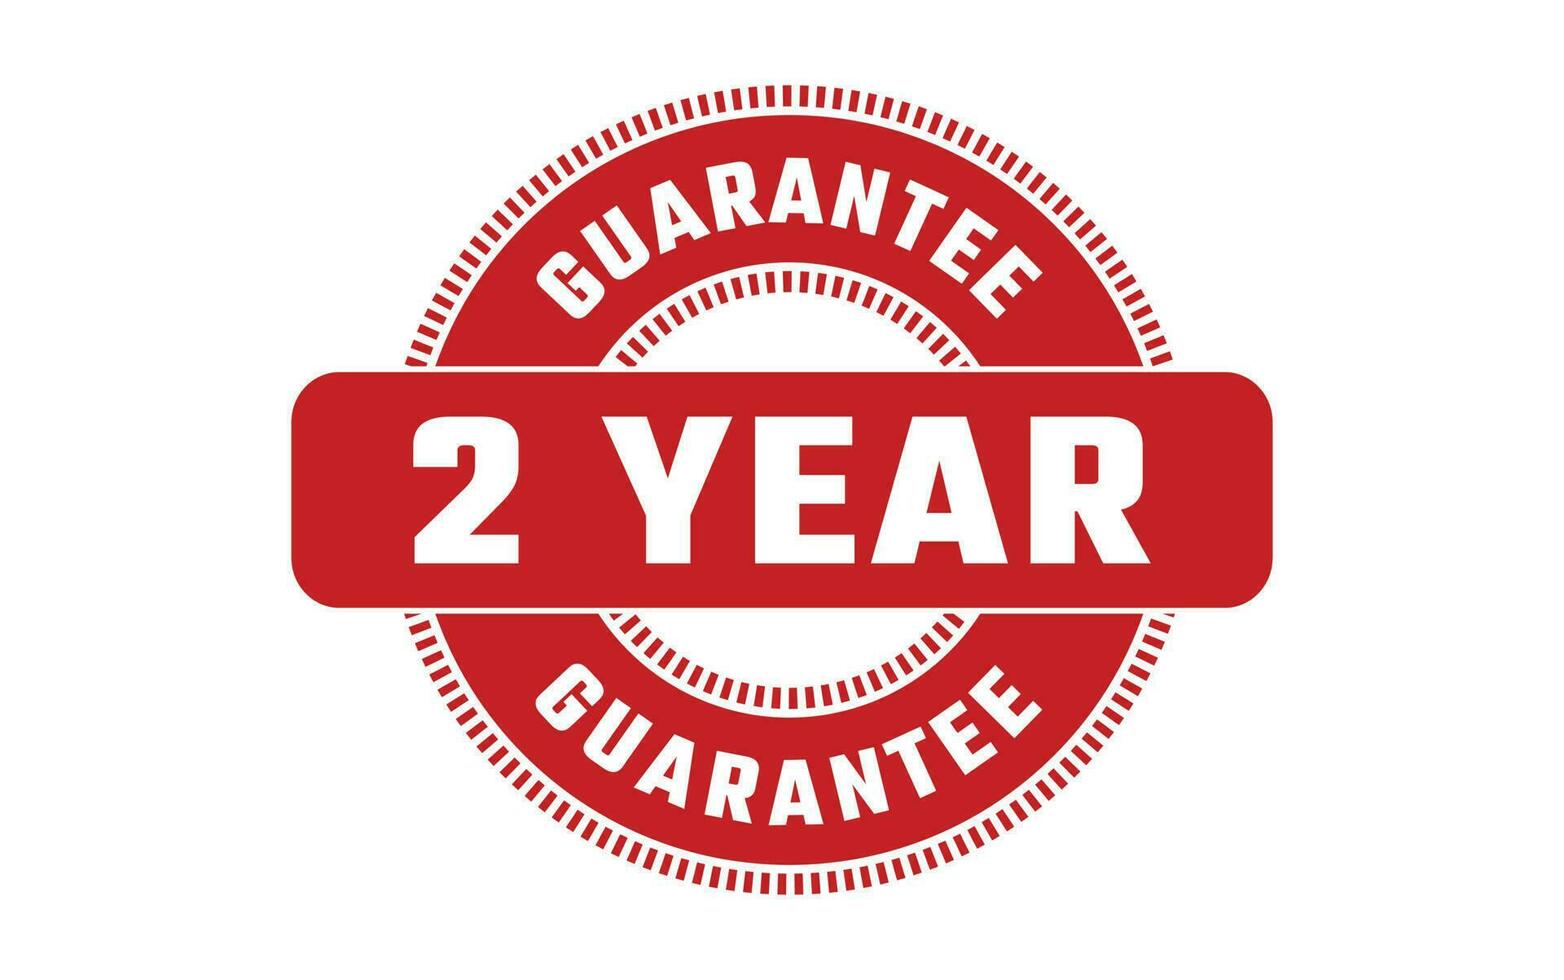 2 Year Guarantee Rubber Stamp vector